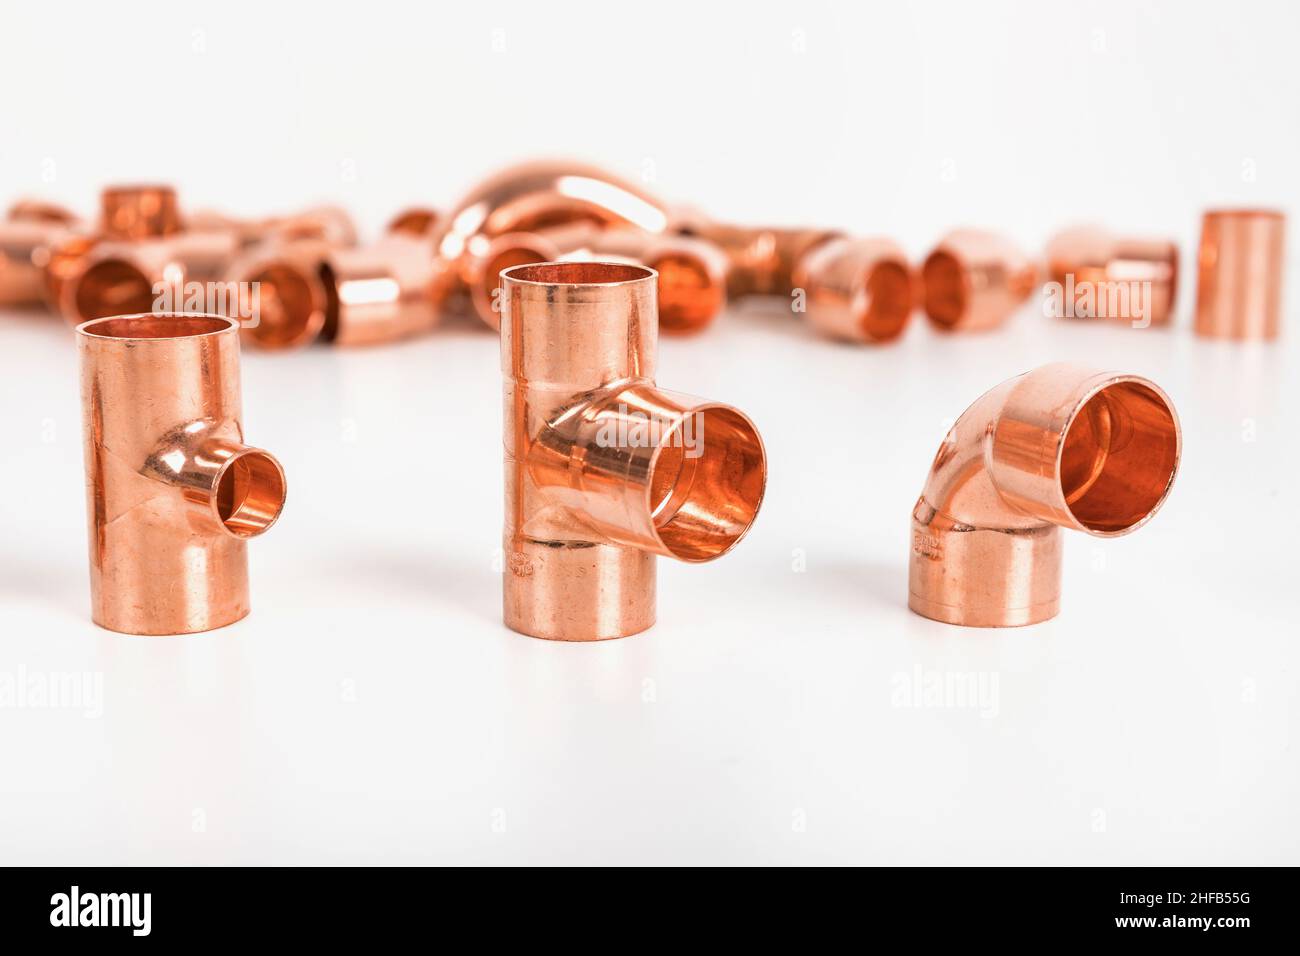 Group of fittings on a white background. Copper fittings for pipe connections. Technical basis for heating companies. Stock Photo